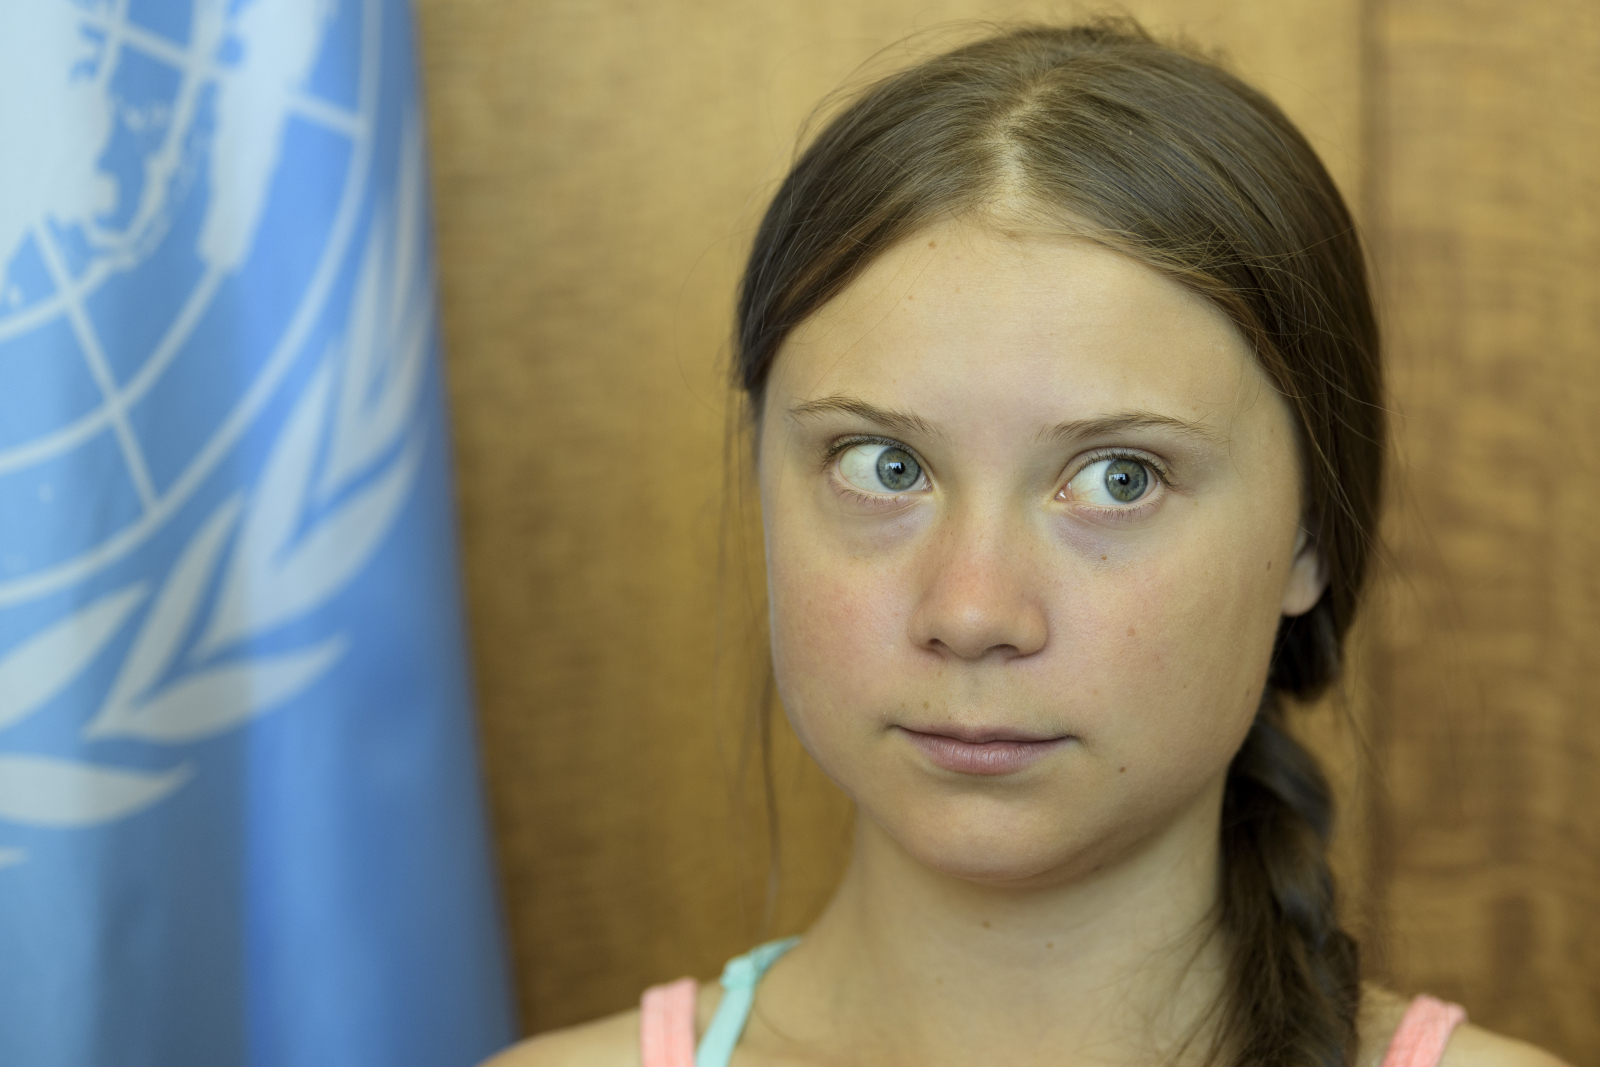 Greta Thunberg is winning hearts and minds — and some old men hate it | National ...1600 x 1067